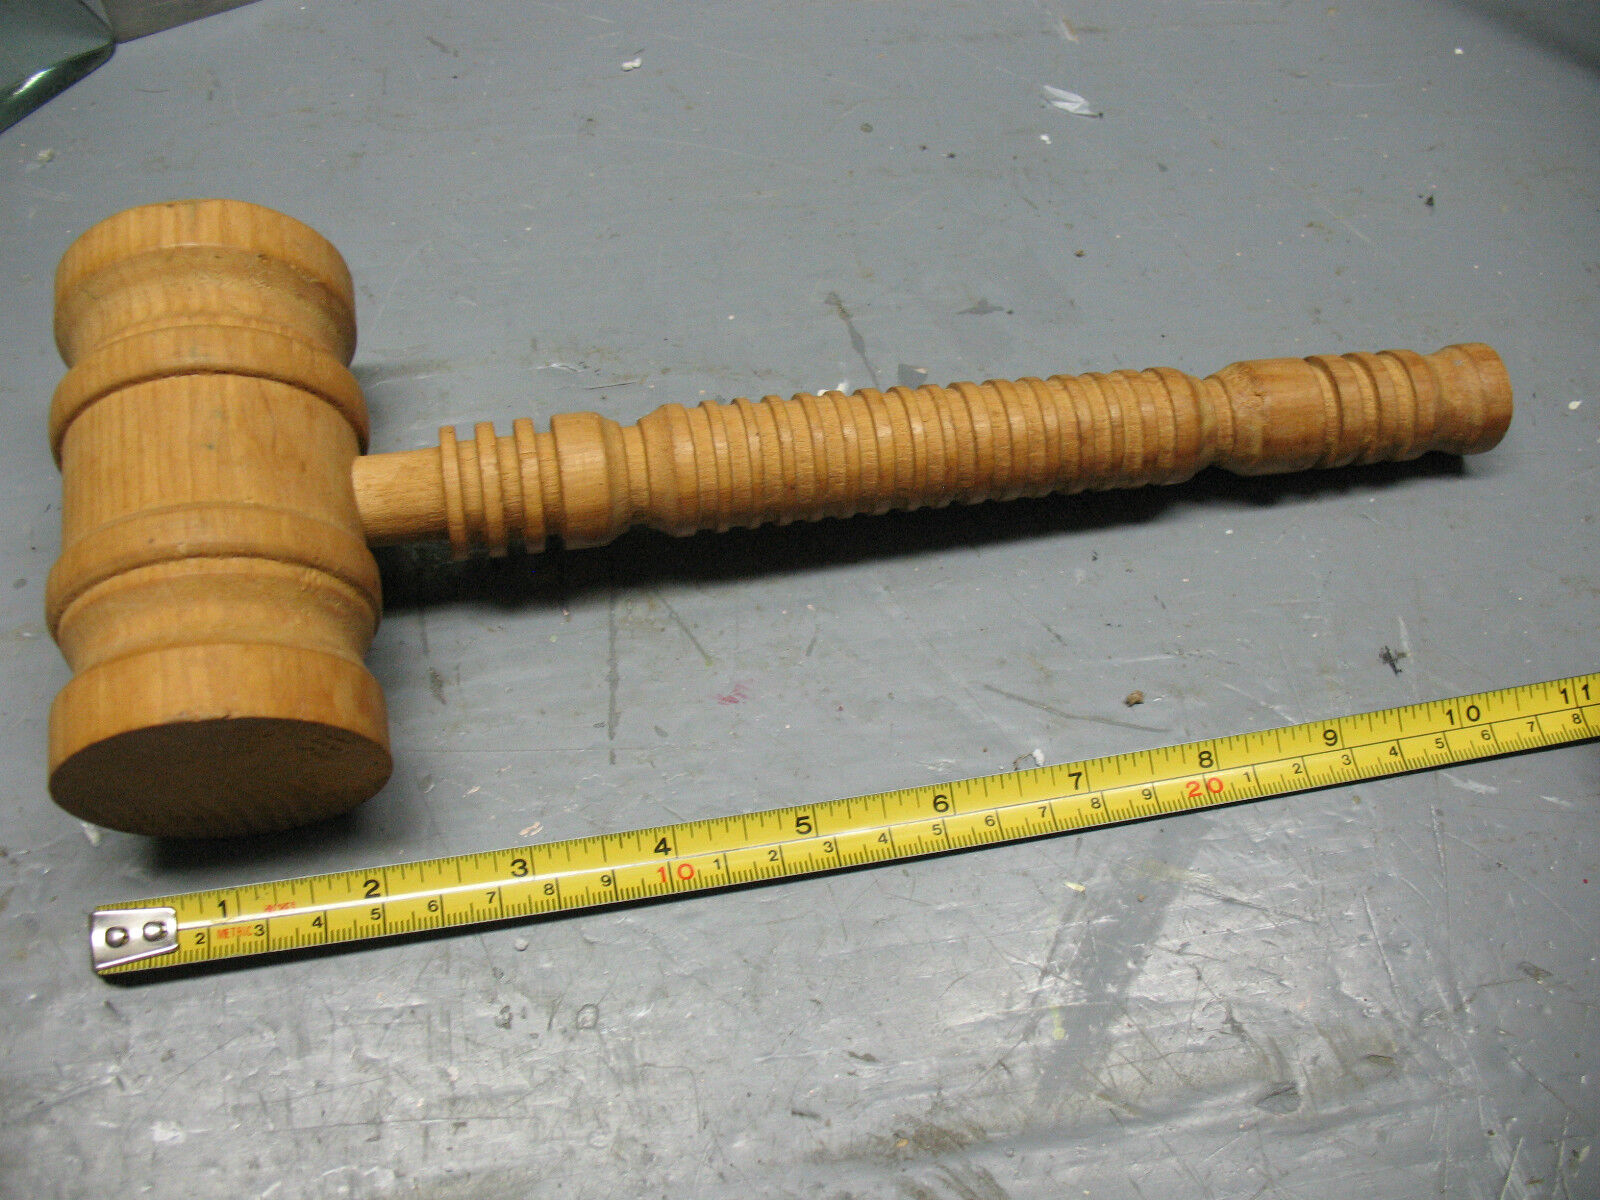 MALLET  ROUND HEAD  TURNED   GROOVED HANDLE VINT. EXCELLENT  